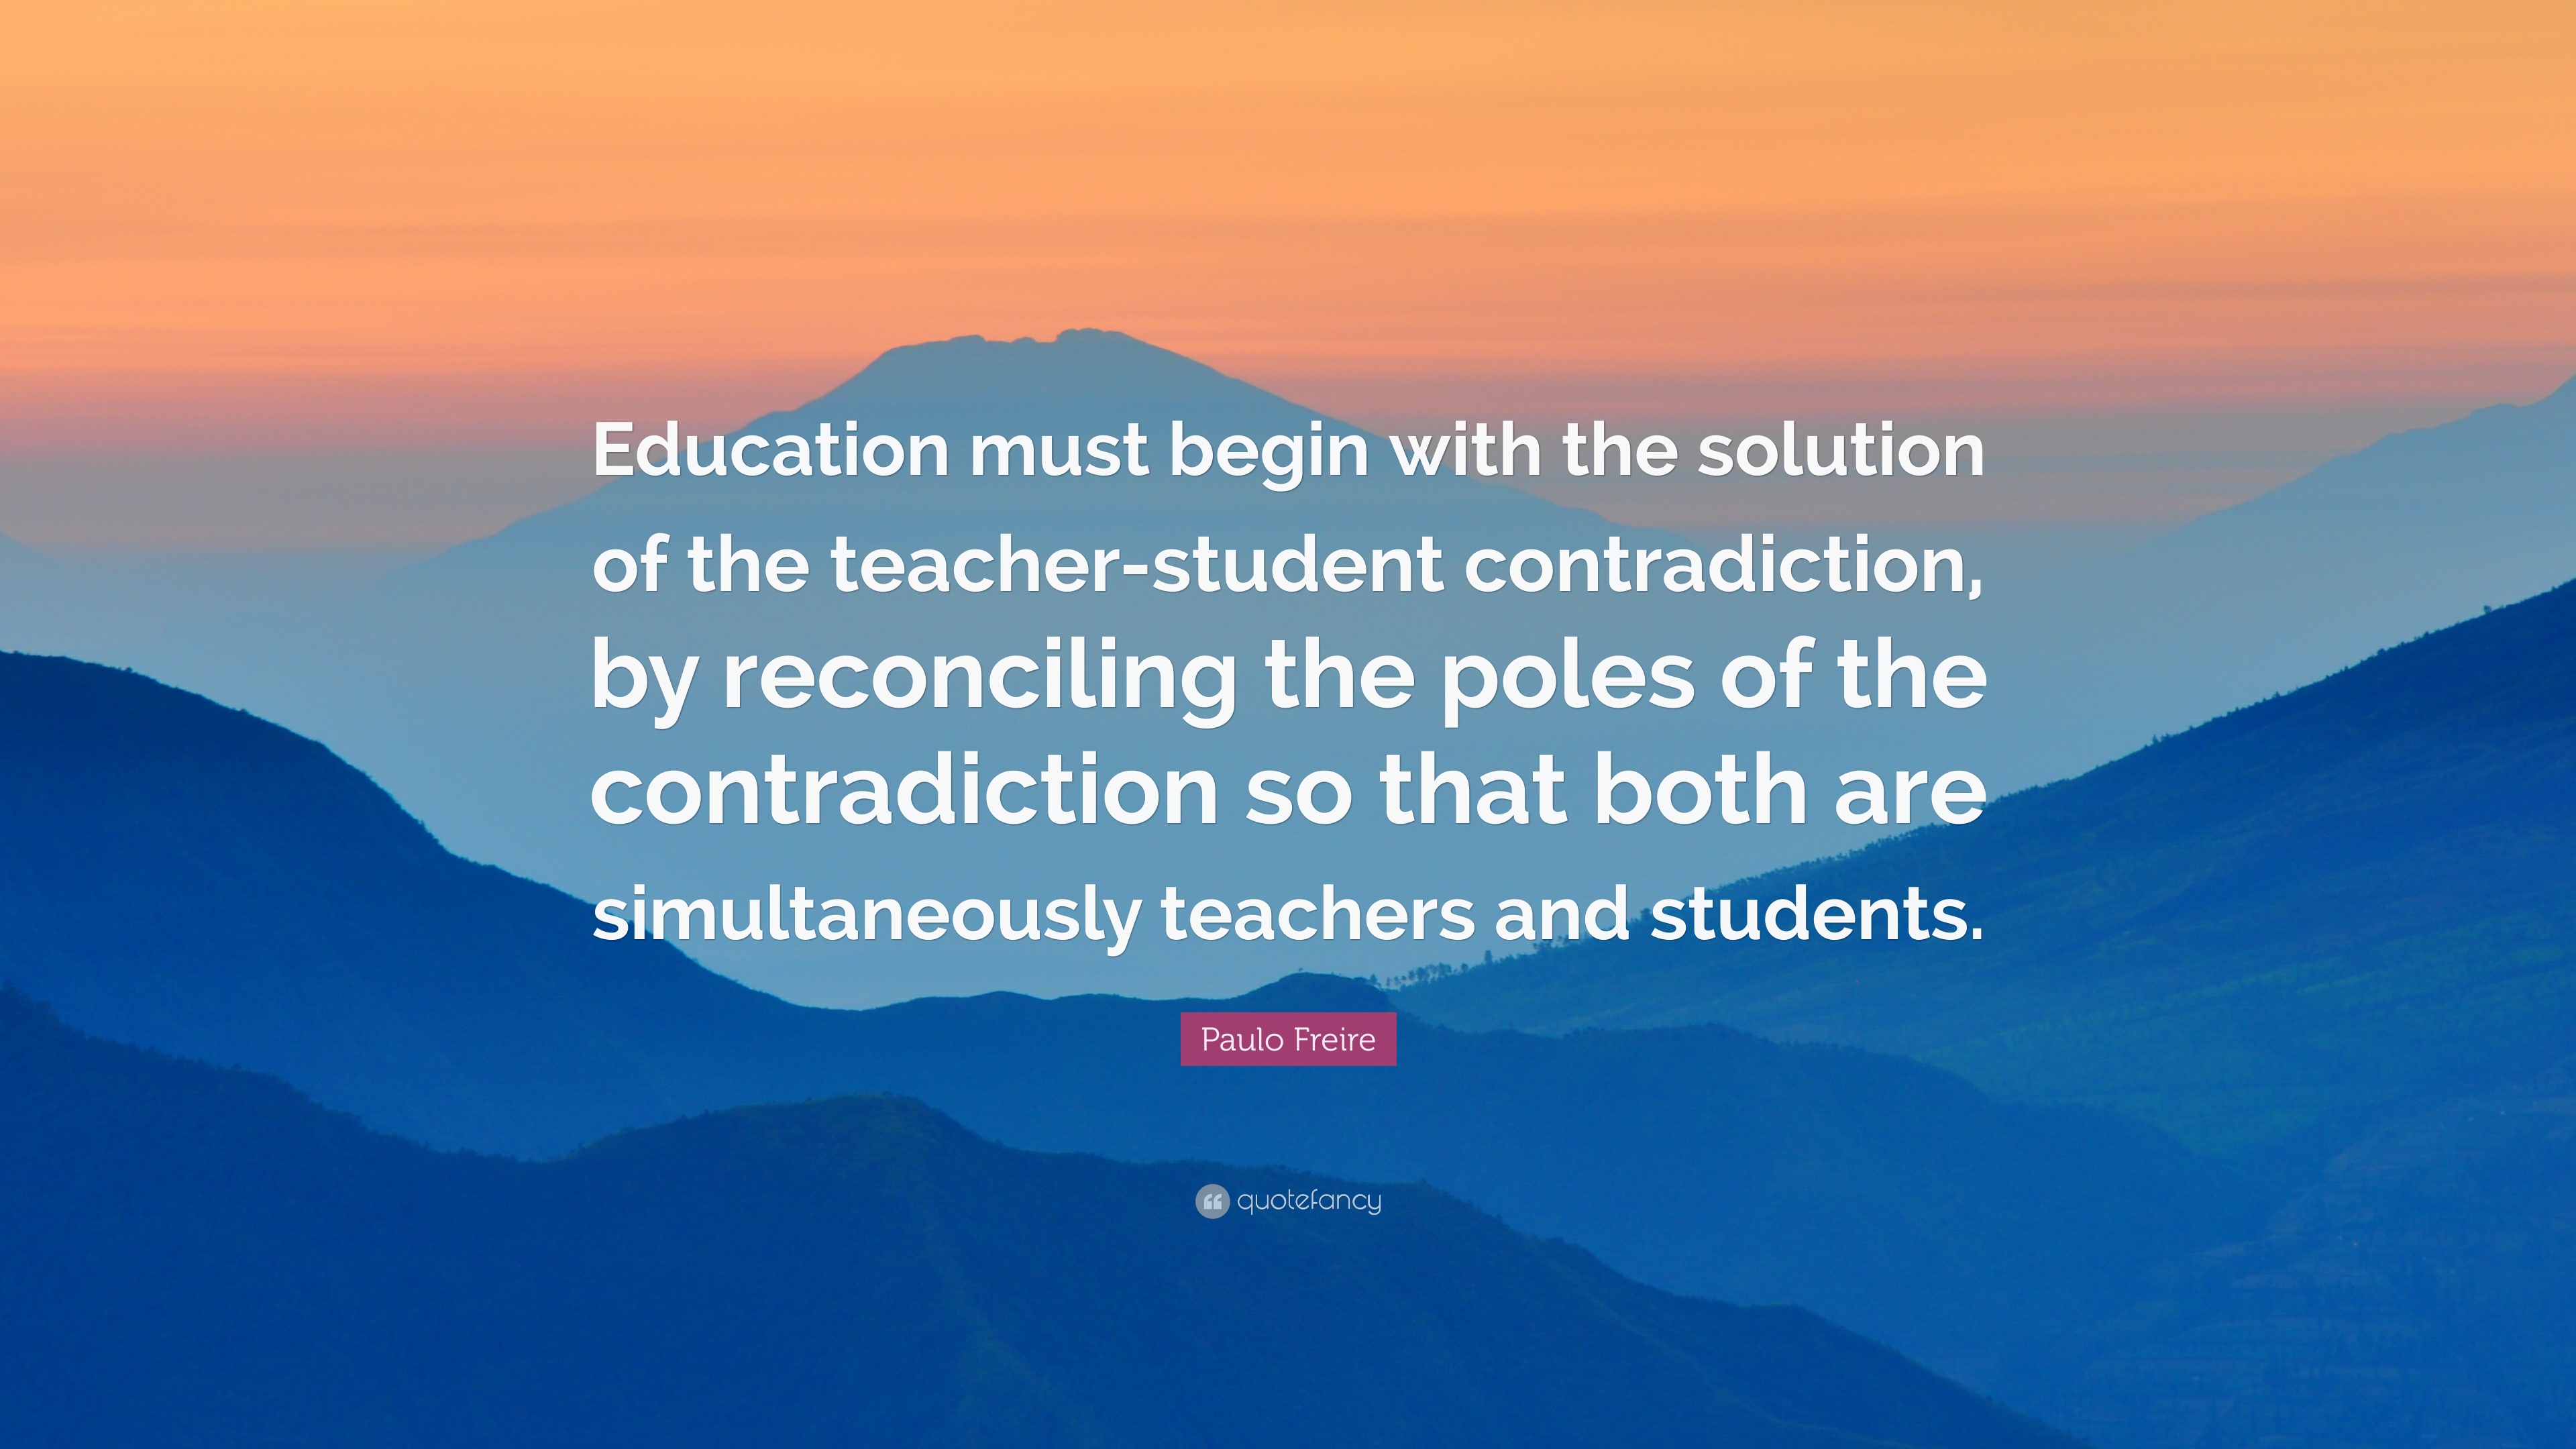 Paulo Freire Quote: “Education must begin with the solution